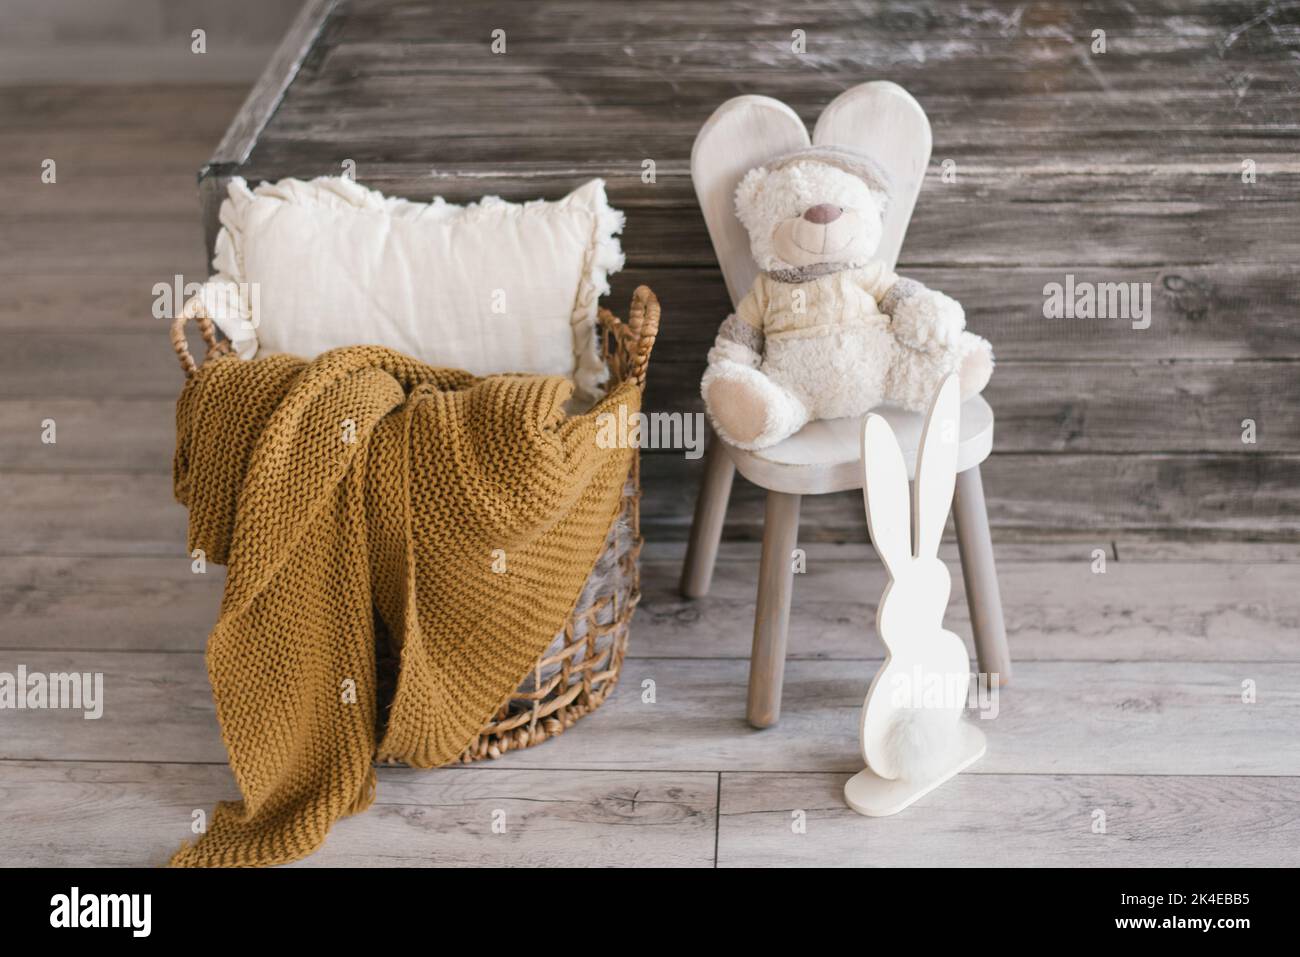 Children's soft toy bear sits on a chair, next to it there is a plywood bunny and a basket with a blanket and a pillow. Accessories in the summer room Stock Photo